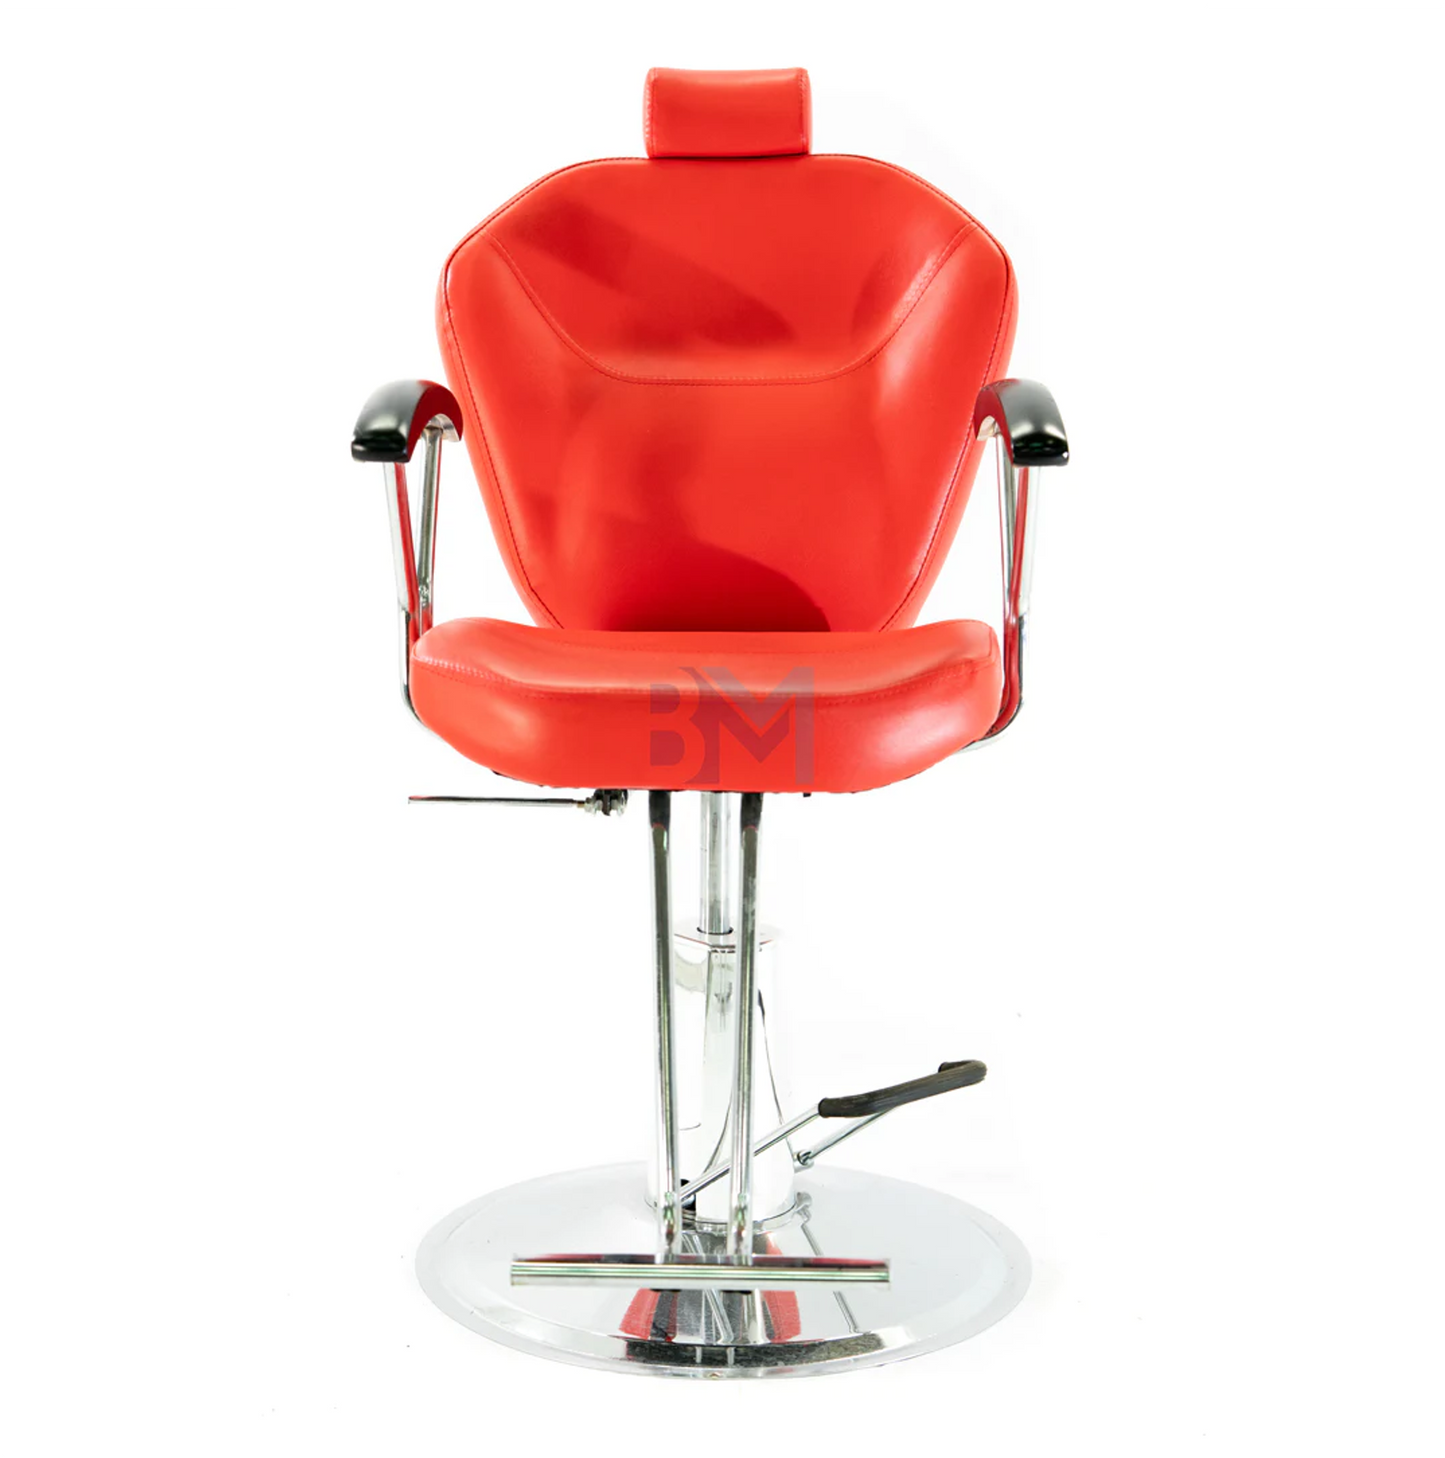 Classic red barbershop and hairdresser chair